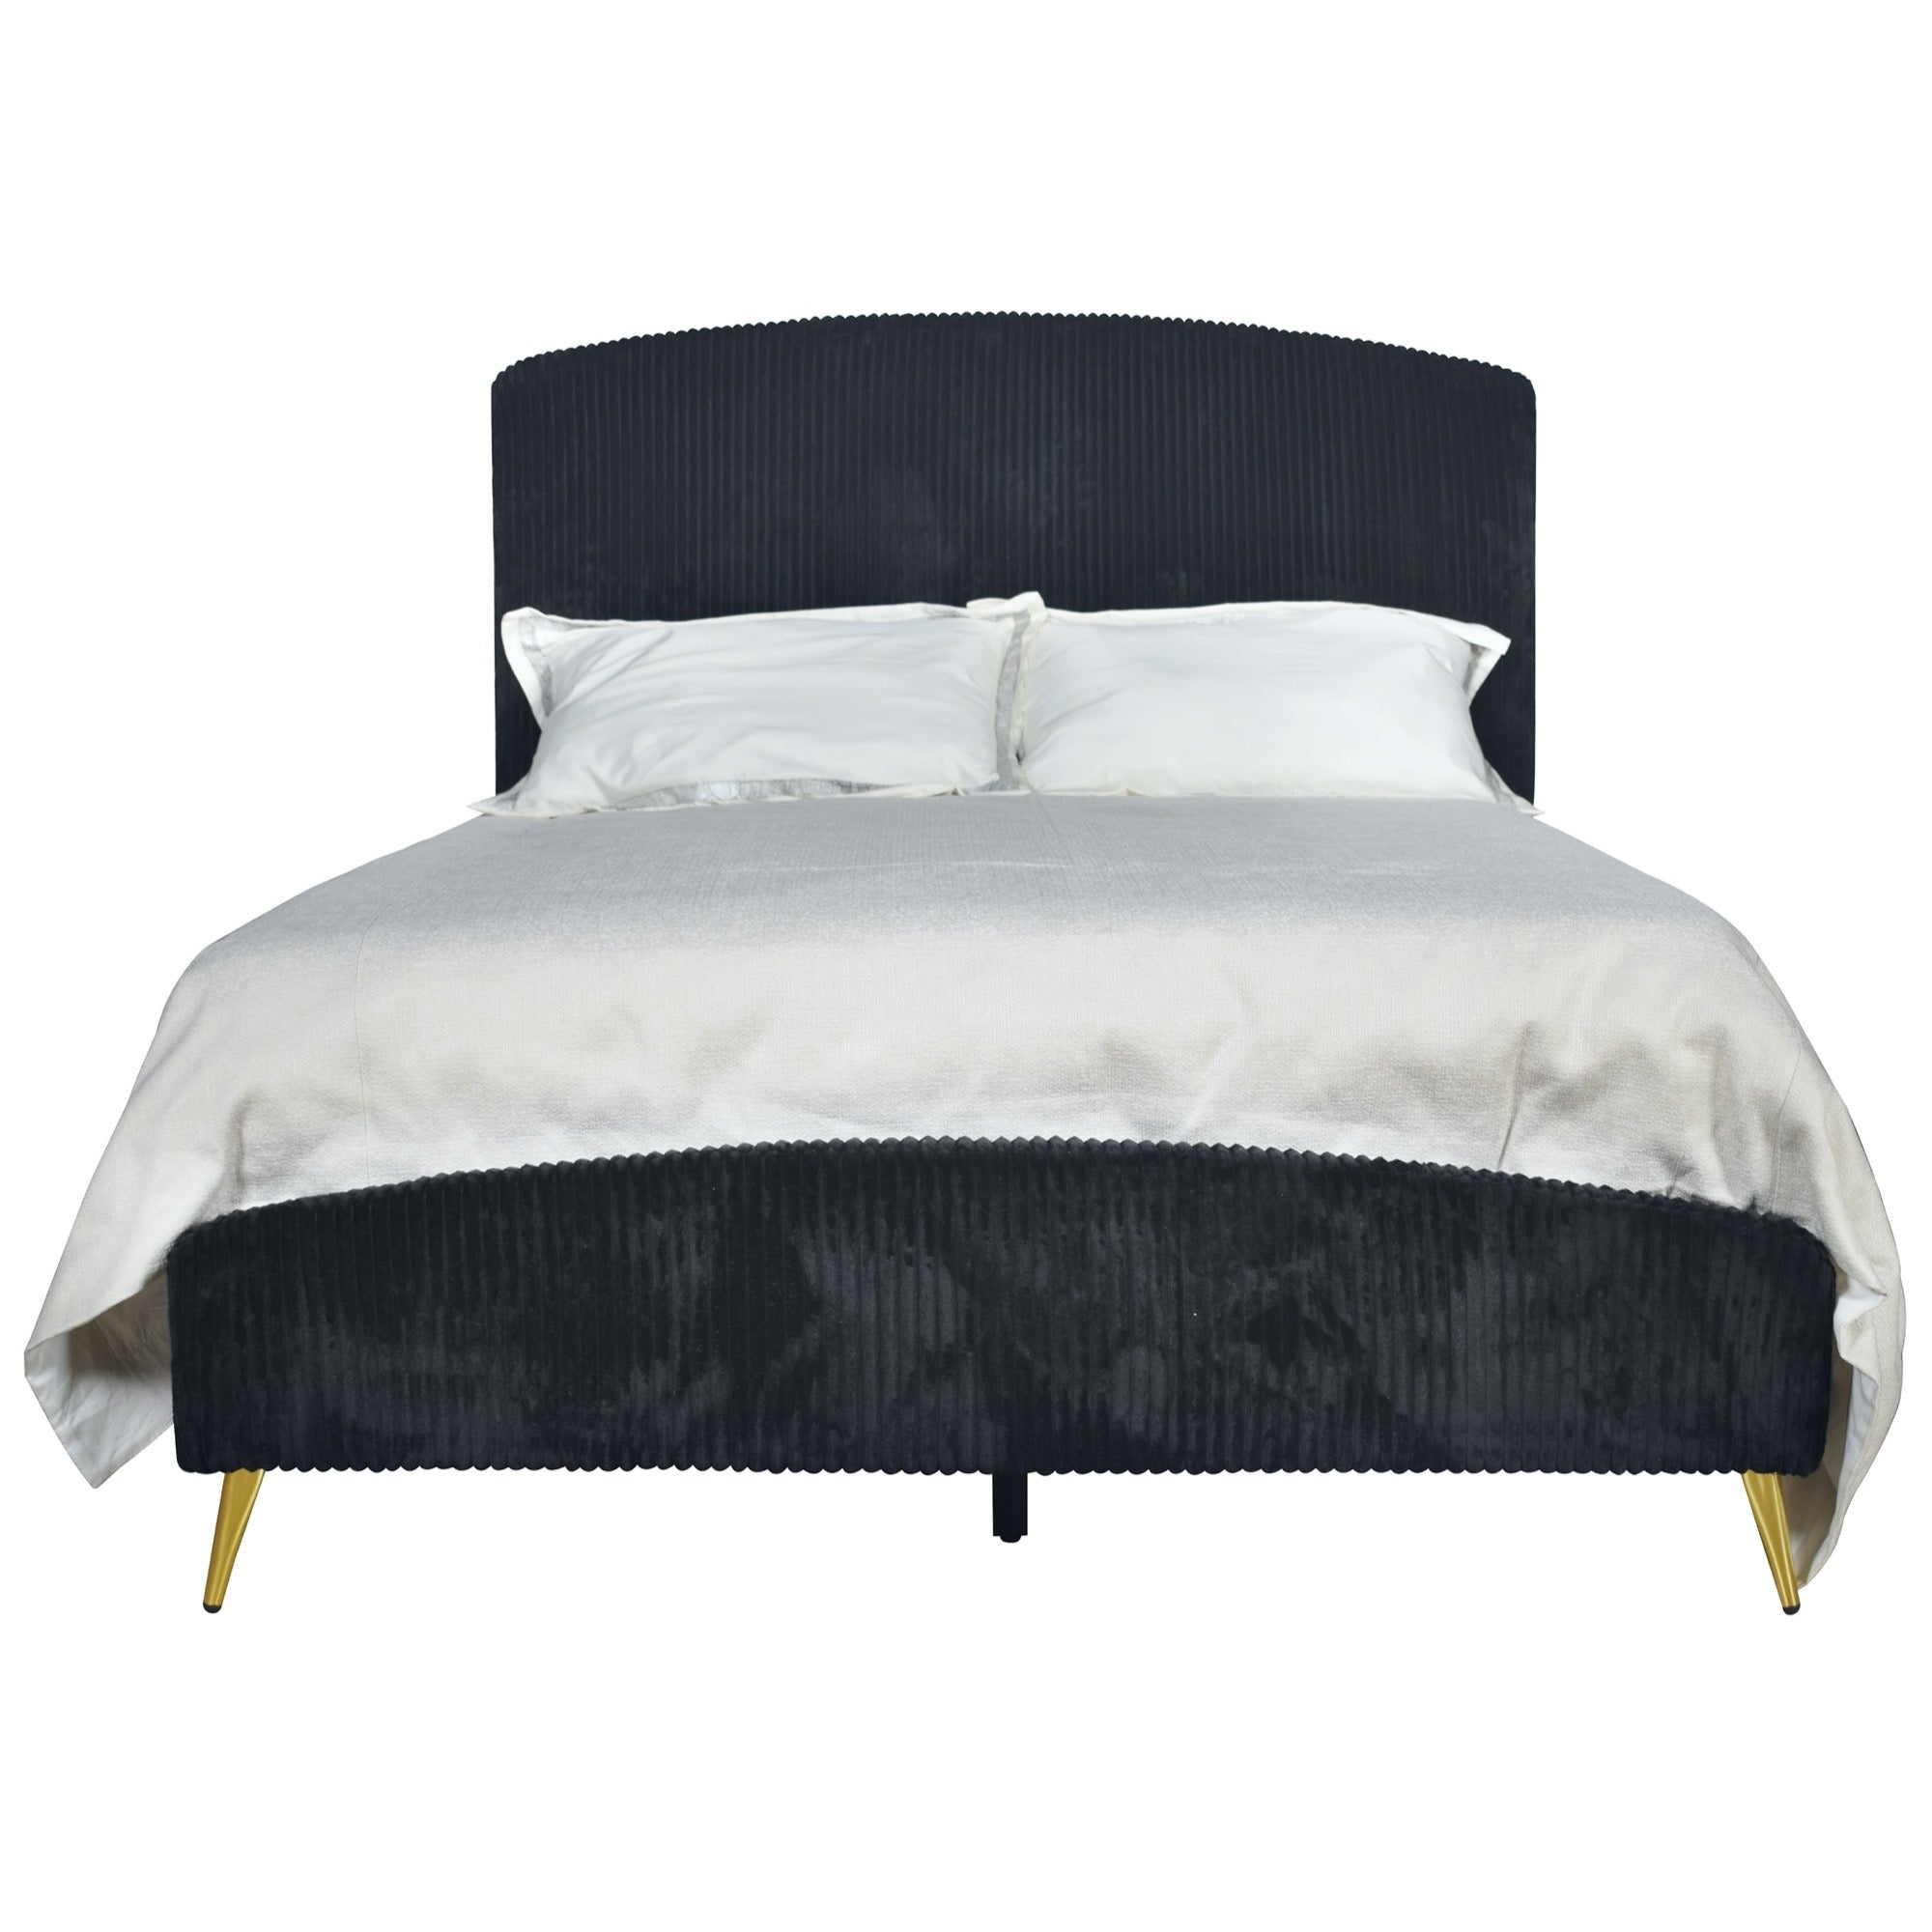 Kailani Queen Bed